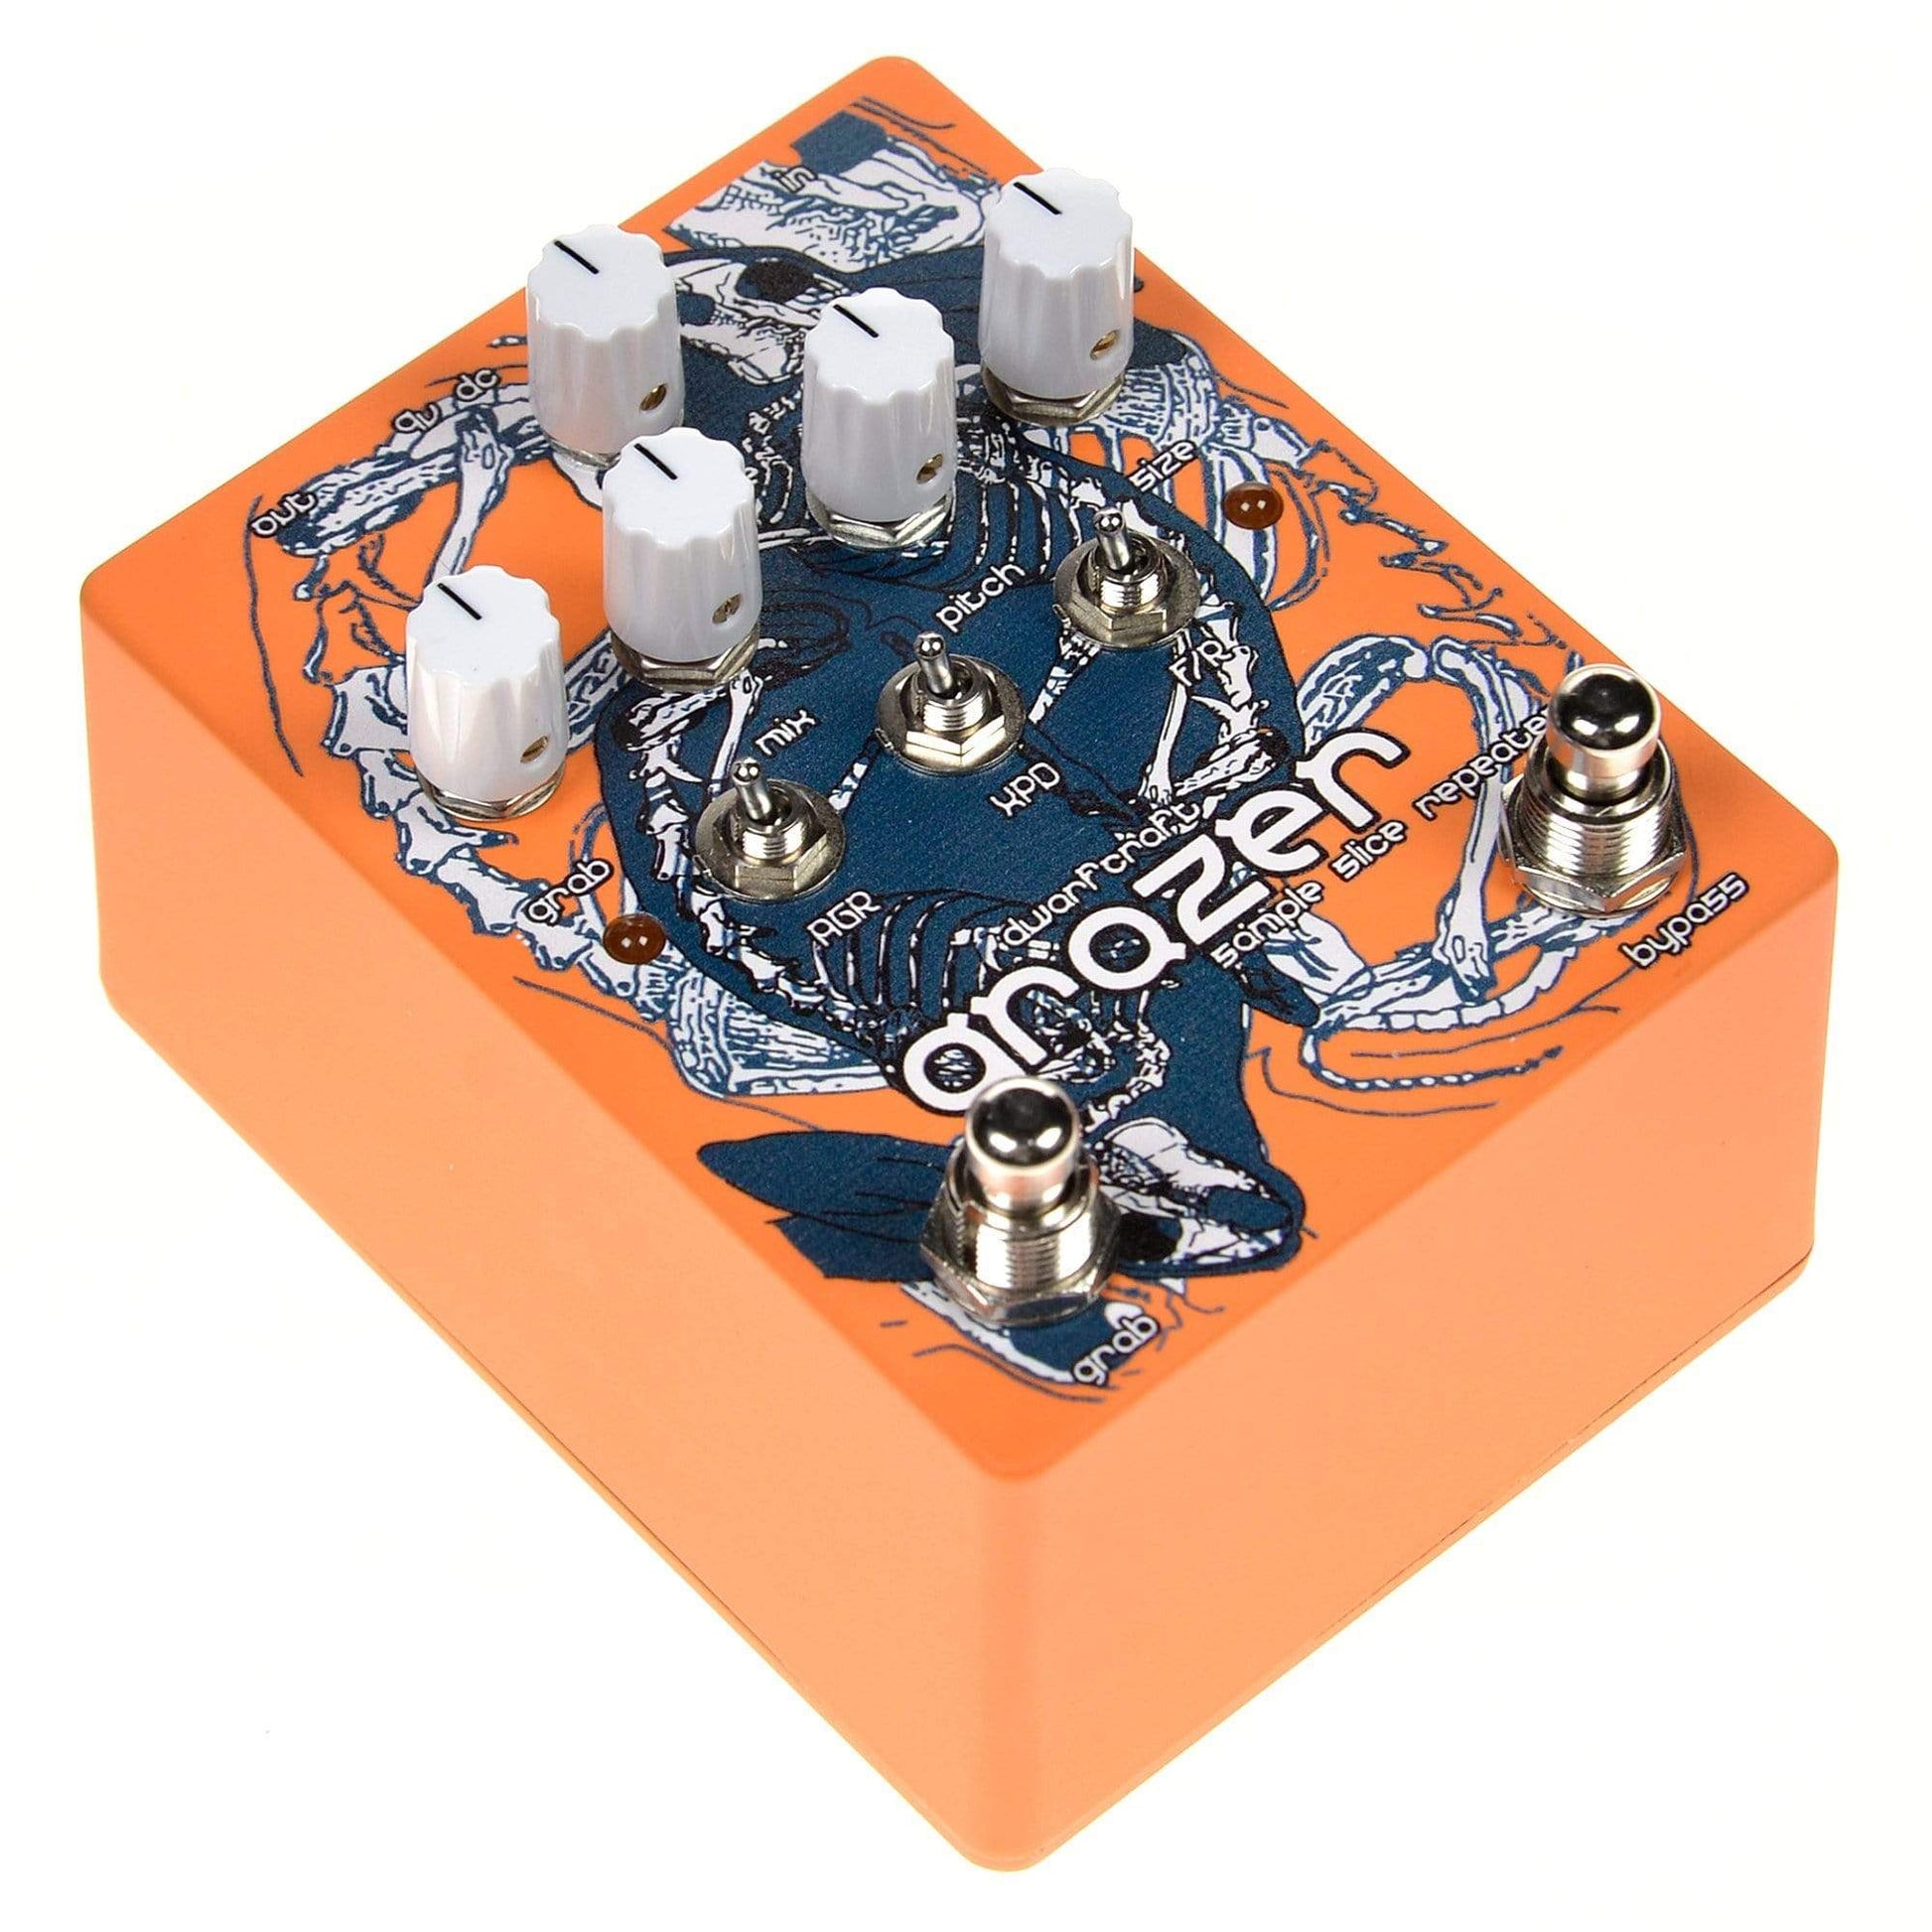 Dwarfcraft Devices Grazer Granular Repeater and Glitch Pedal Effects and Pedals / Delay